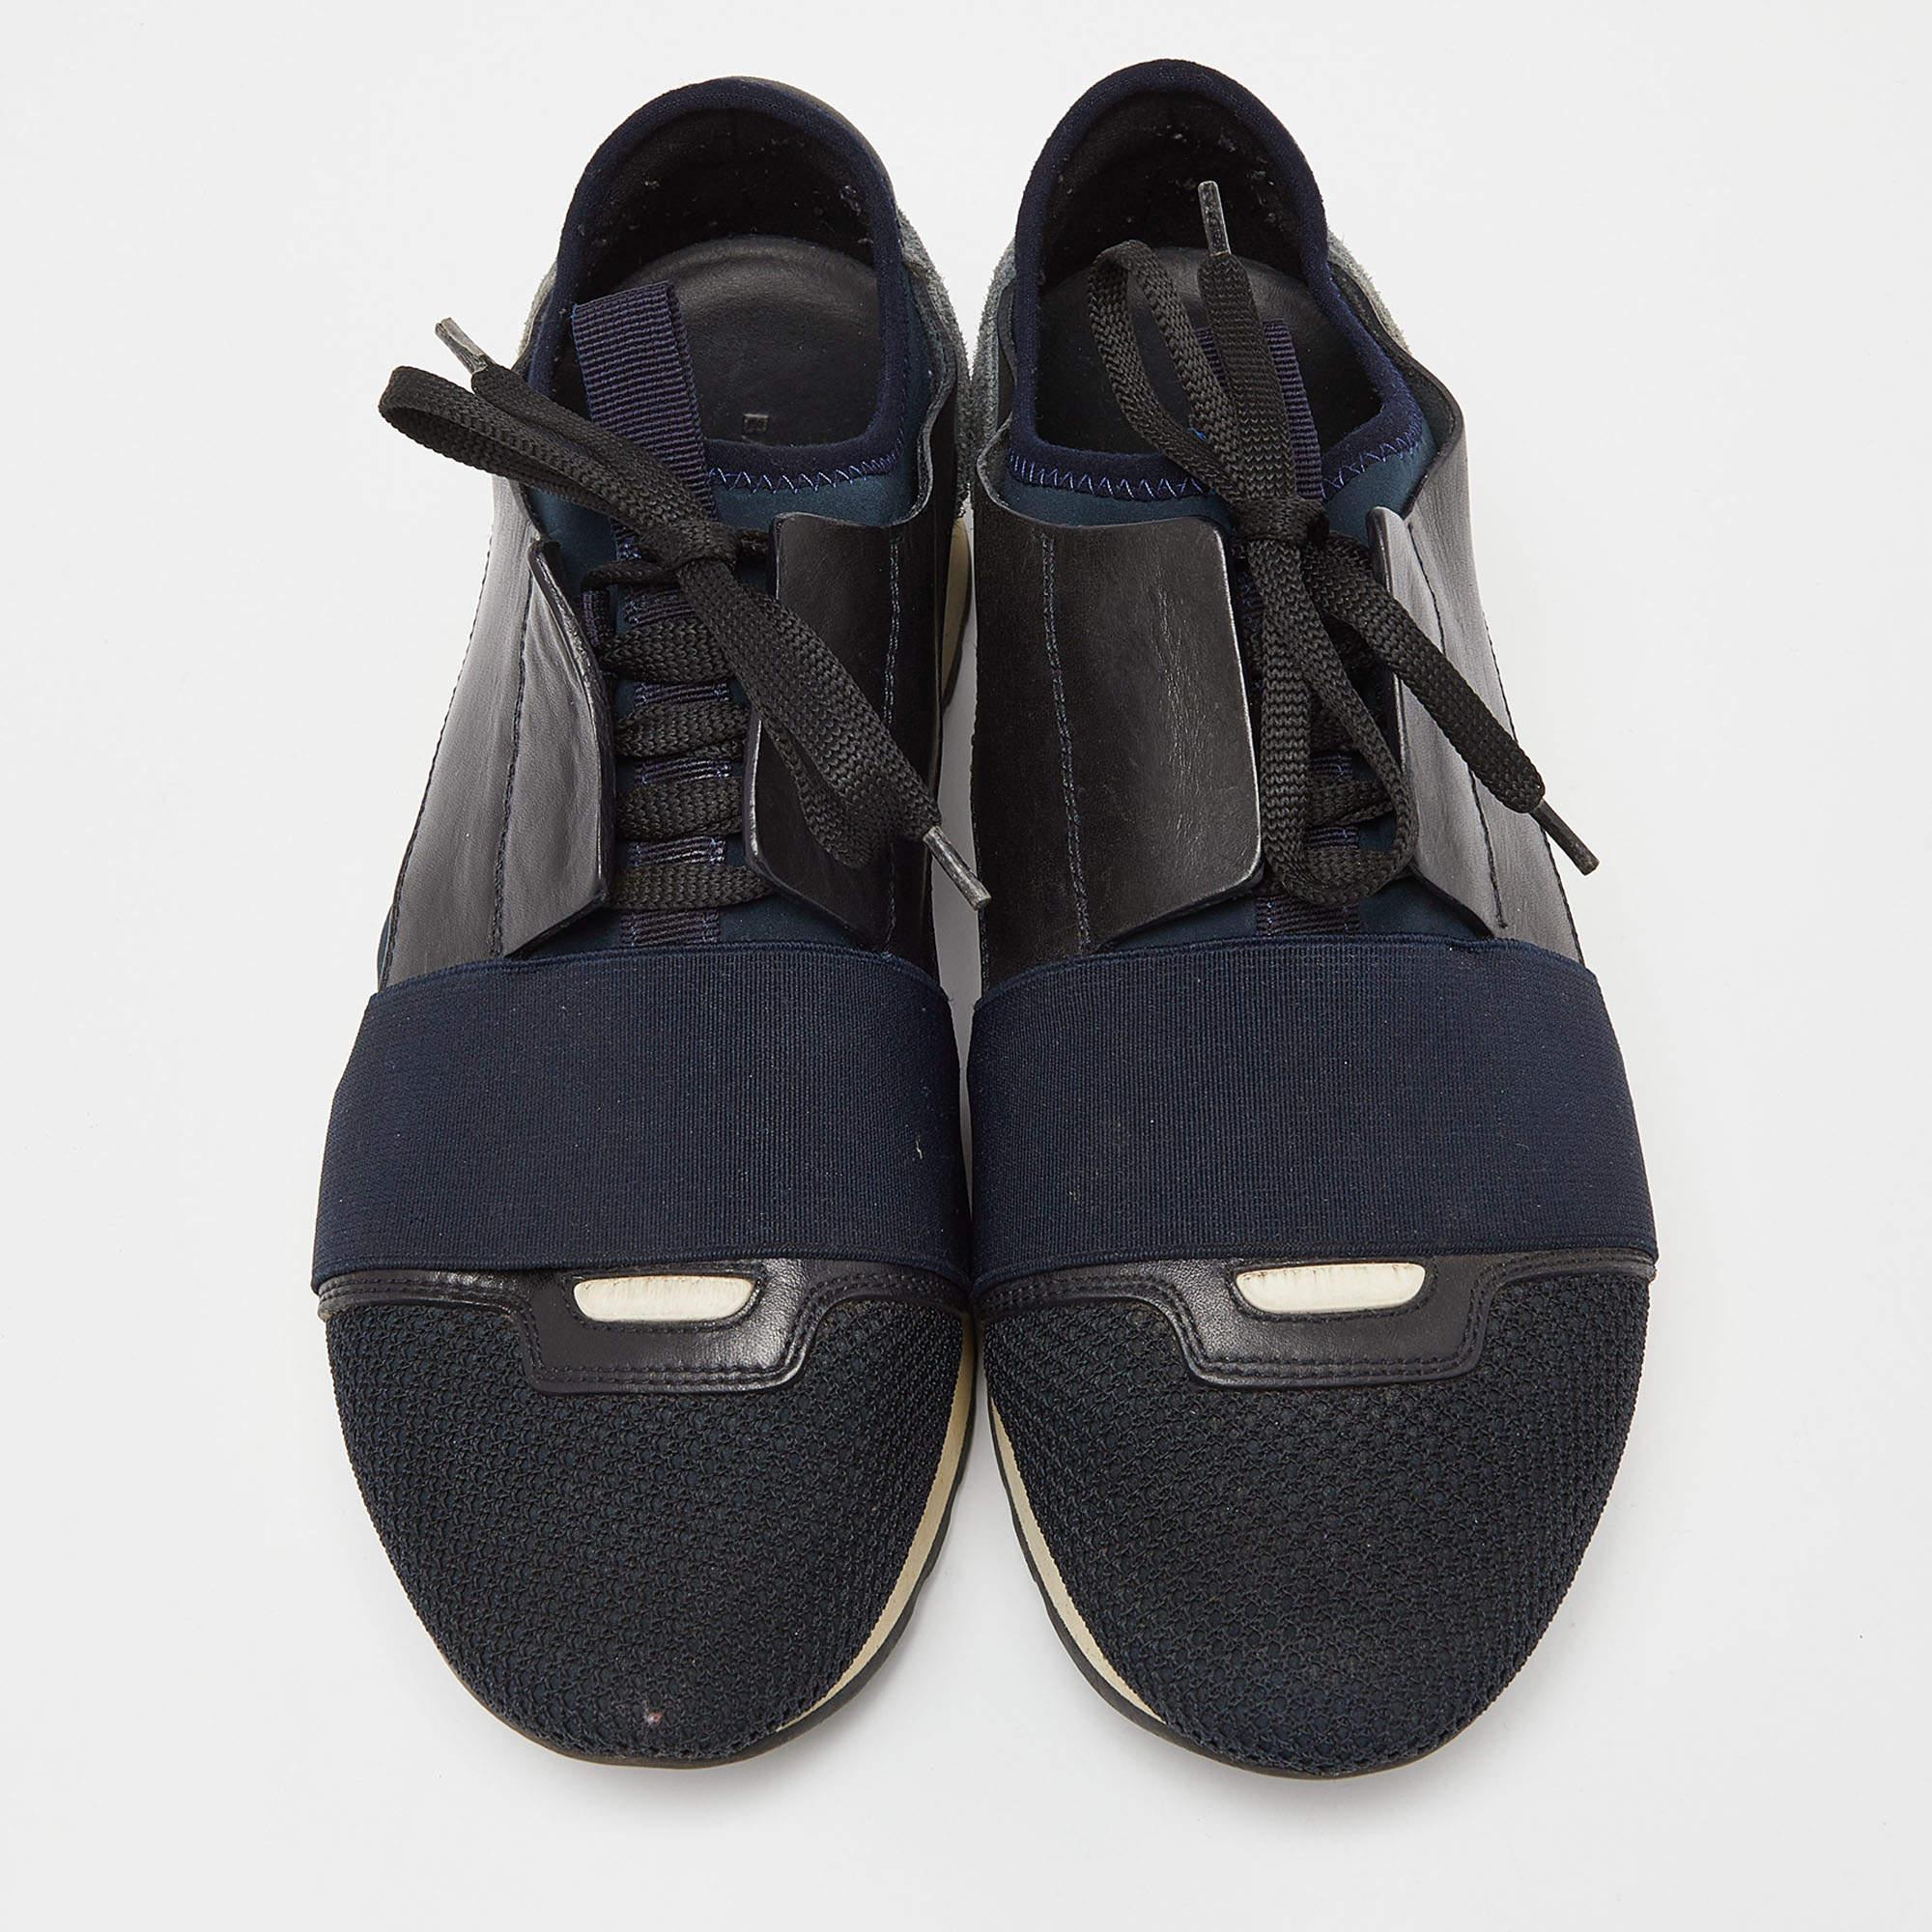 Balenciaga Black/Navy Blue Leather and Mesh Race Runner Sneakers Size 39 In Good Condition For Sale In Dubai, Al Qouz 2